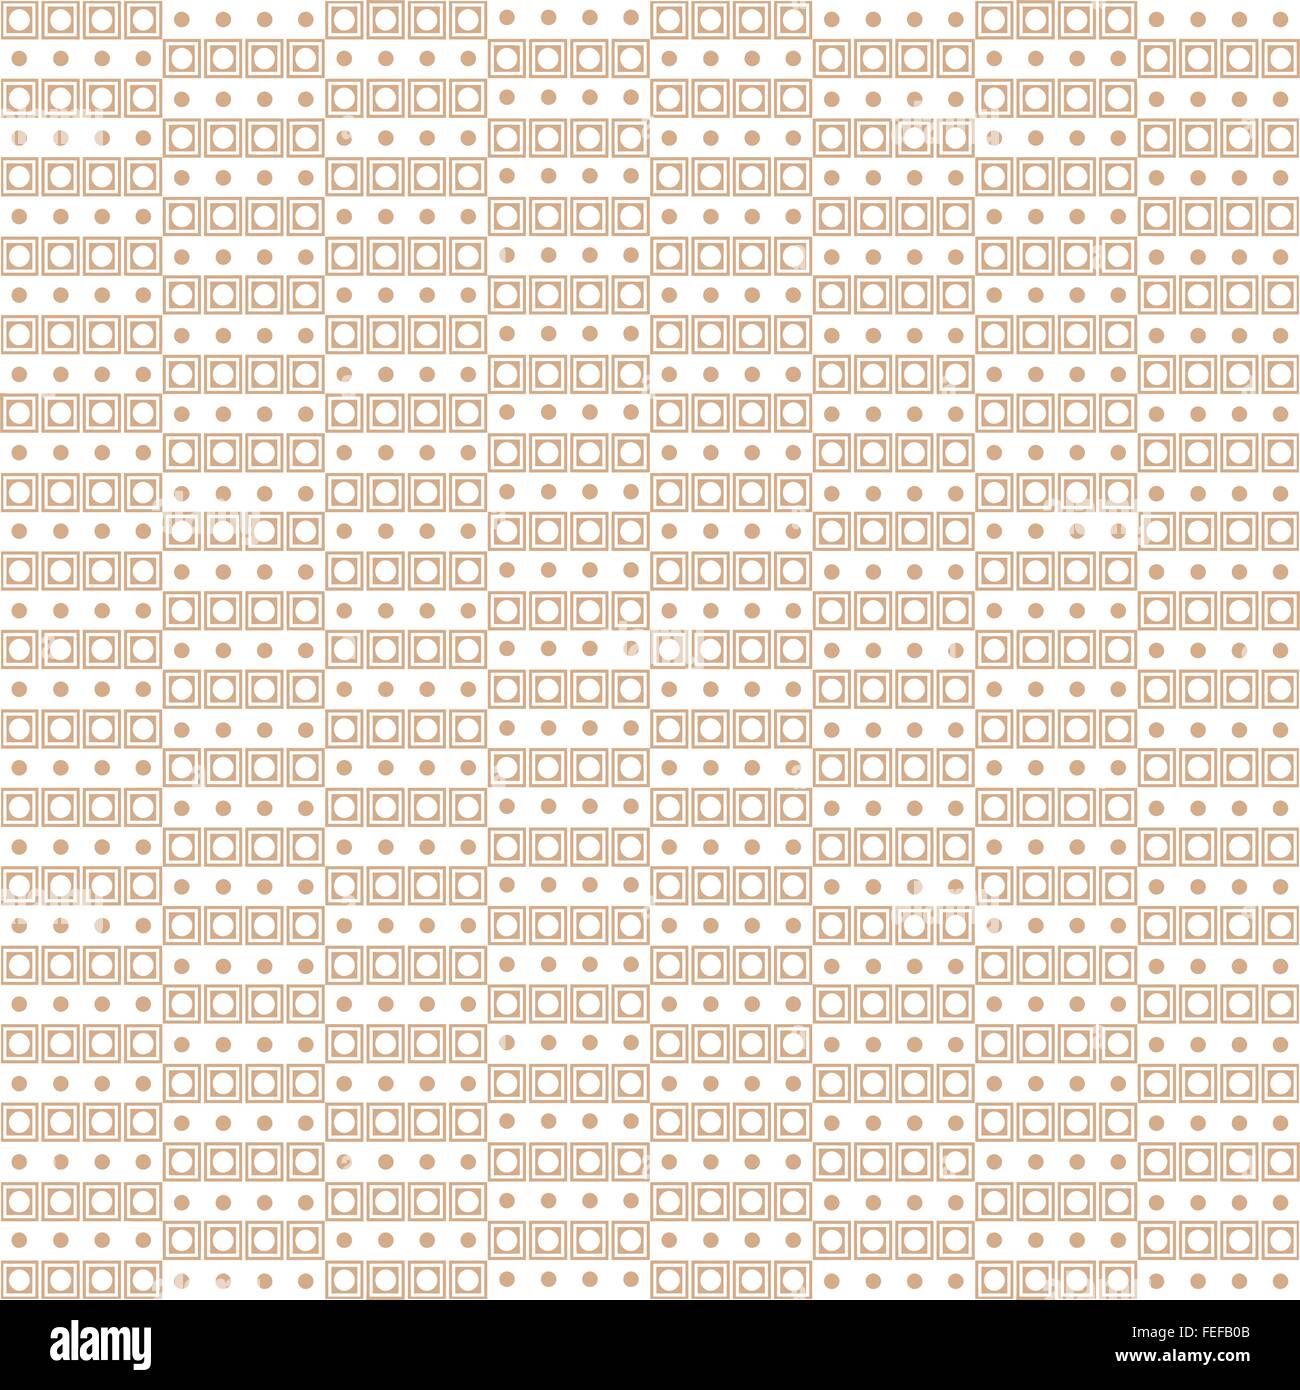 Background of seamless dots pattern Stock Vector